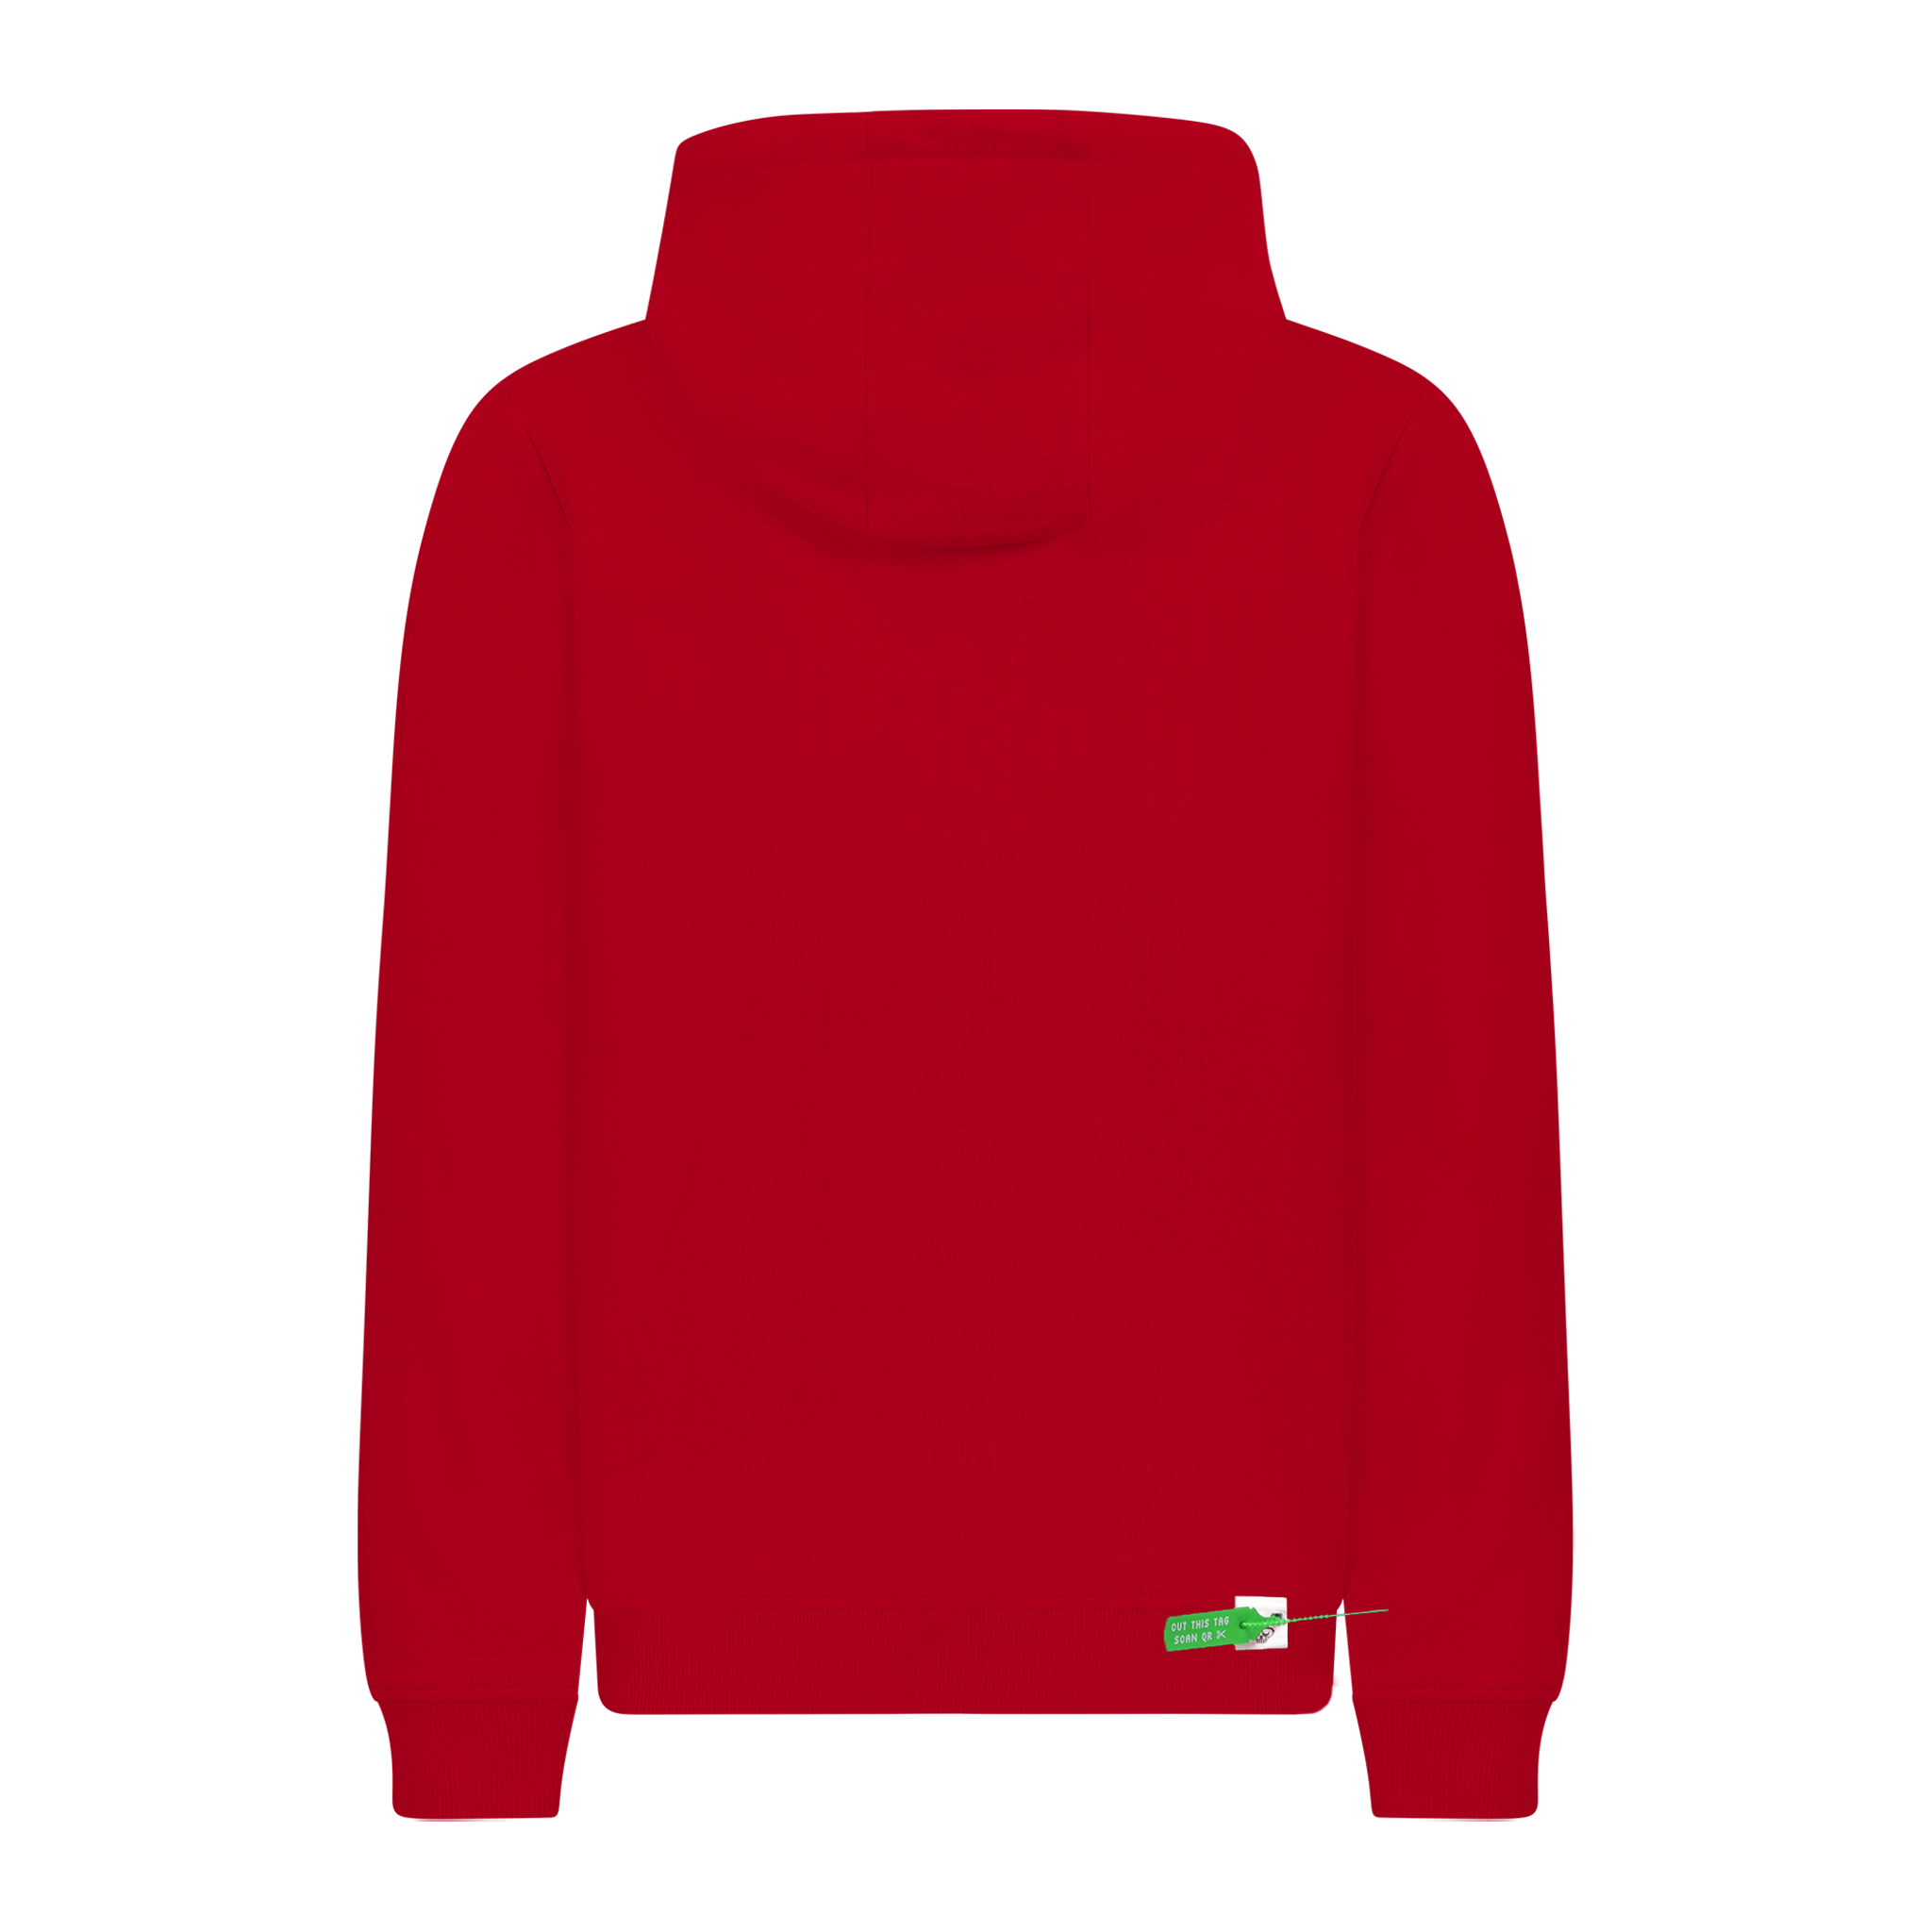 YEAR OF THE DRAGON HOODIE